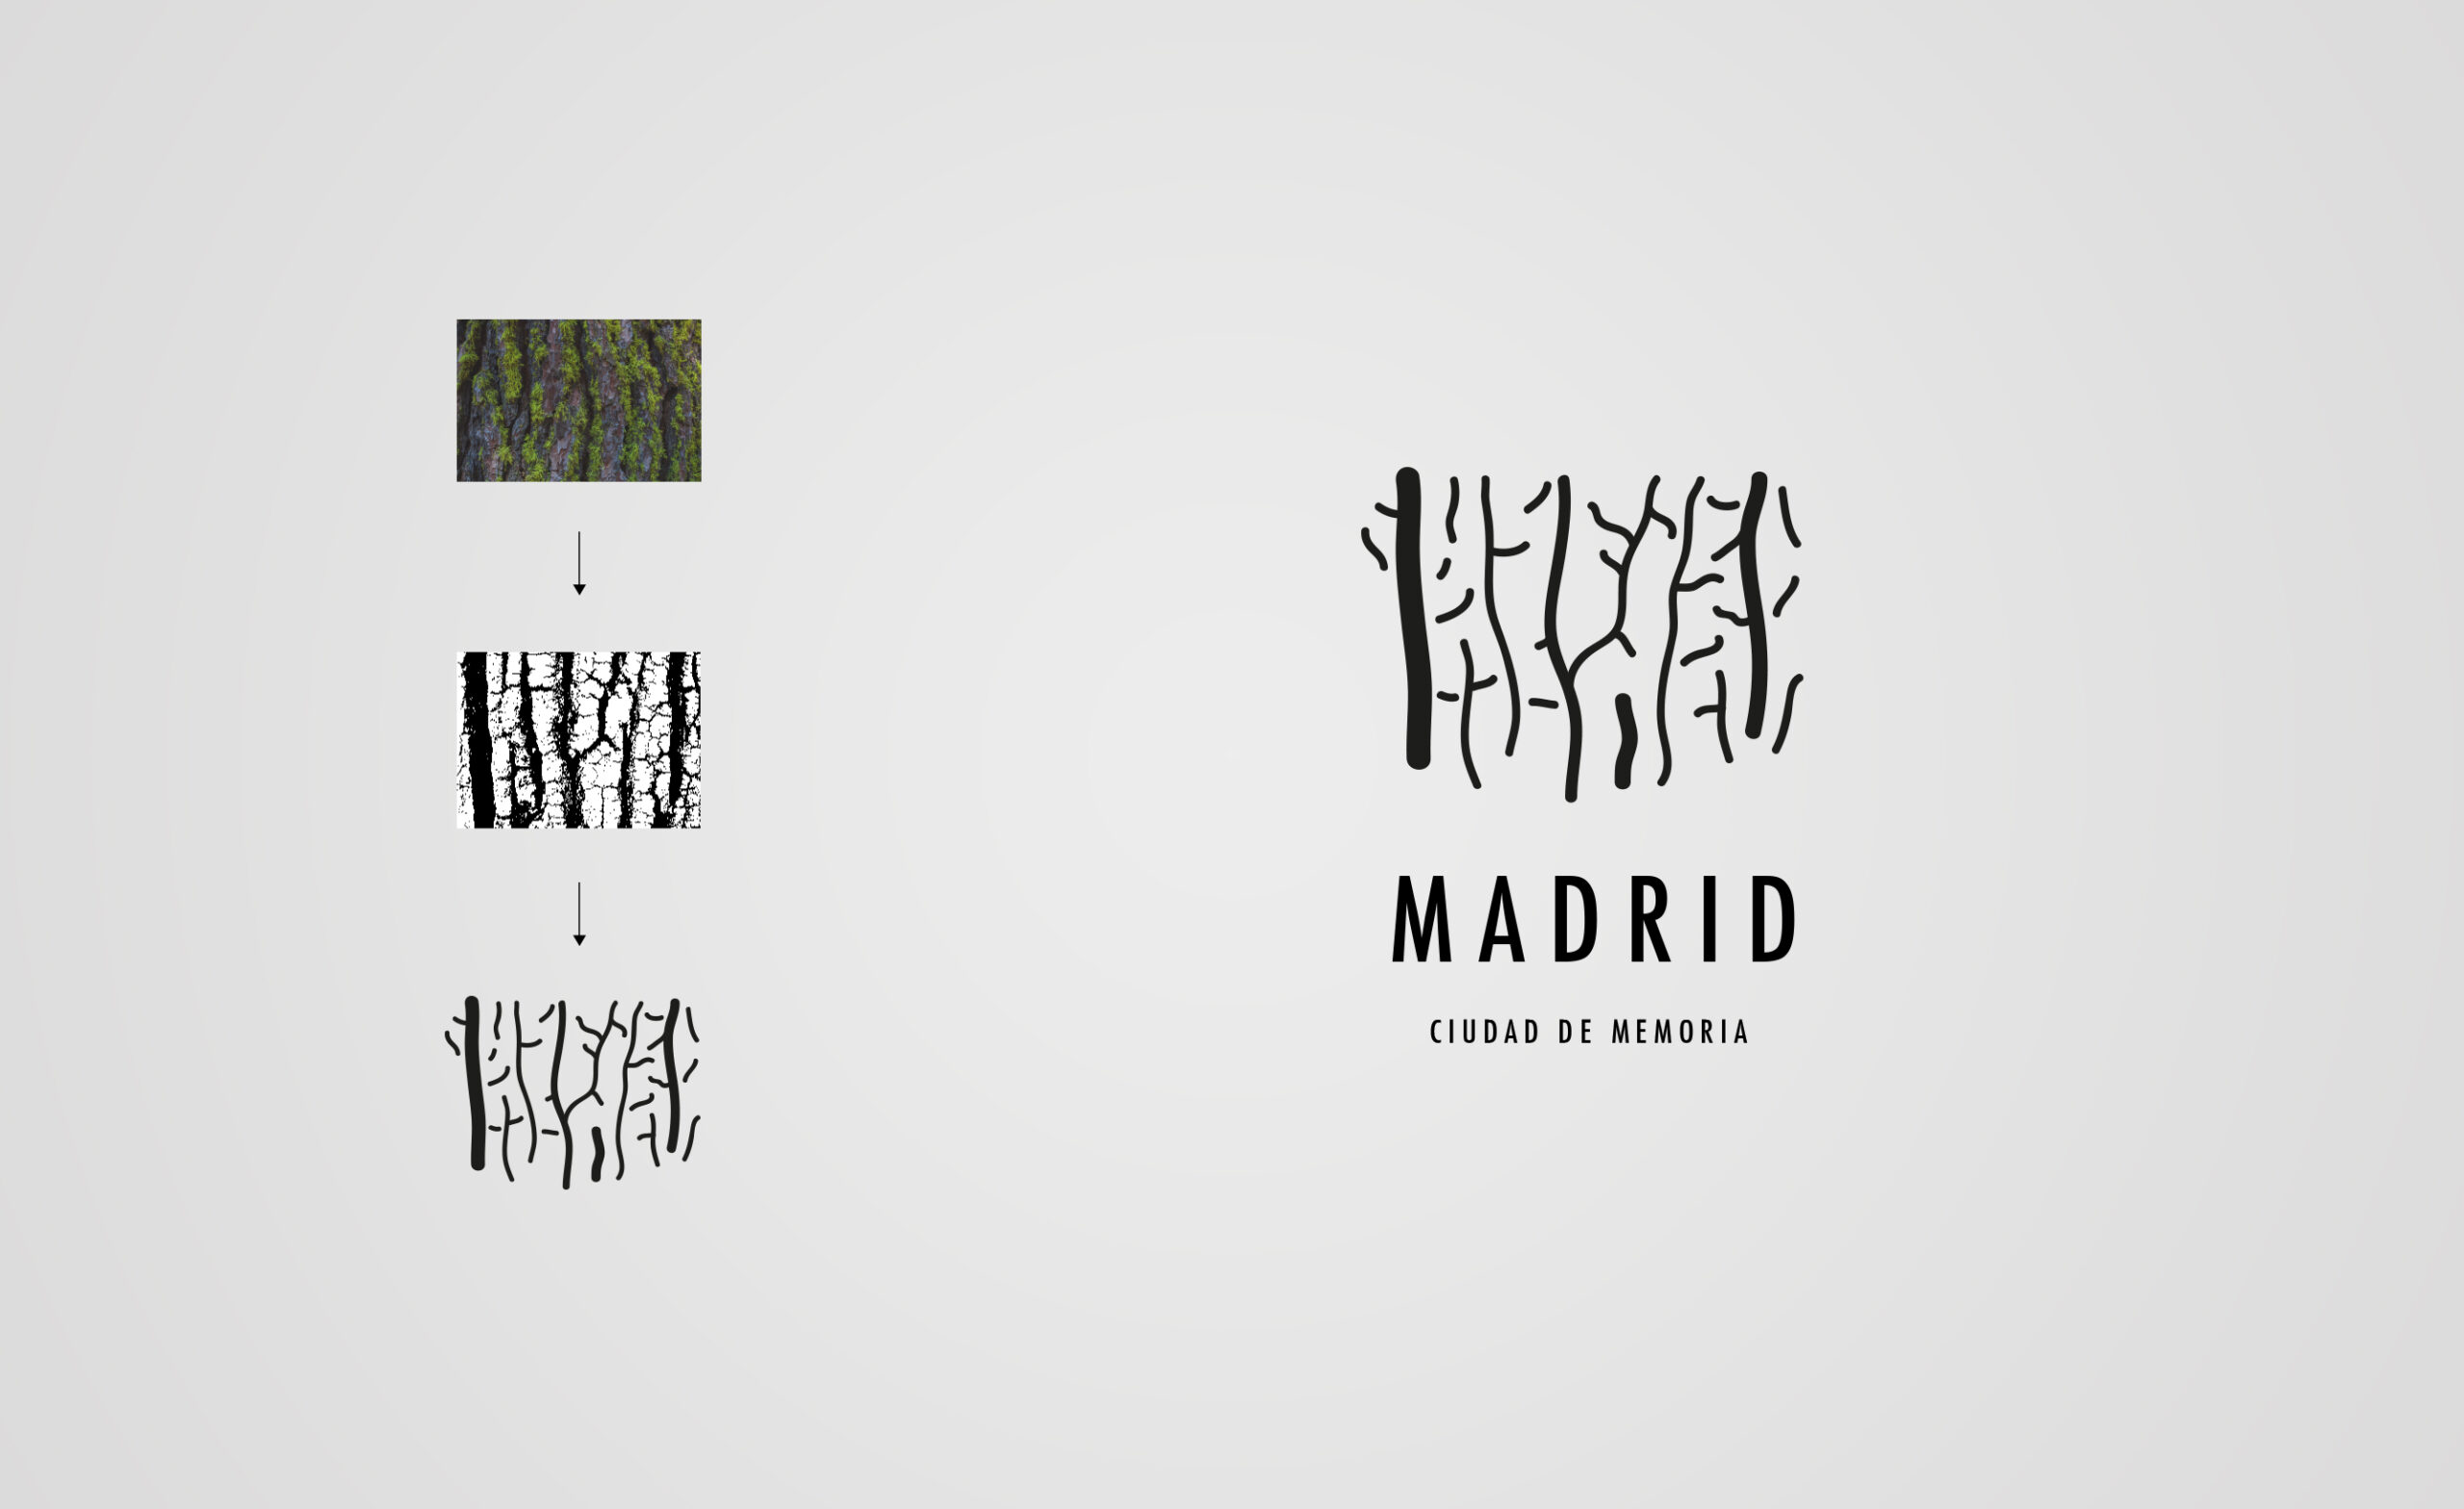 Madrid City Council: branding and design